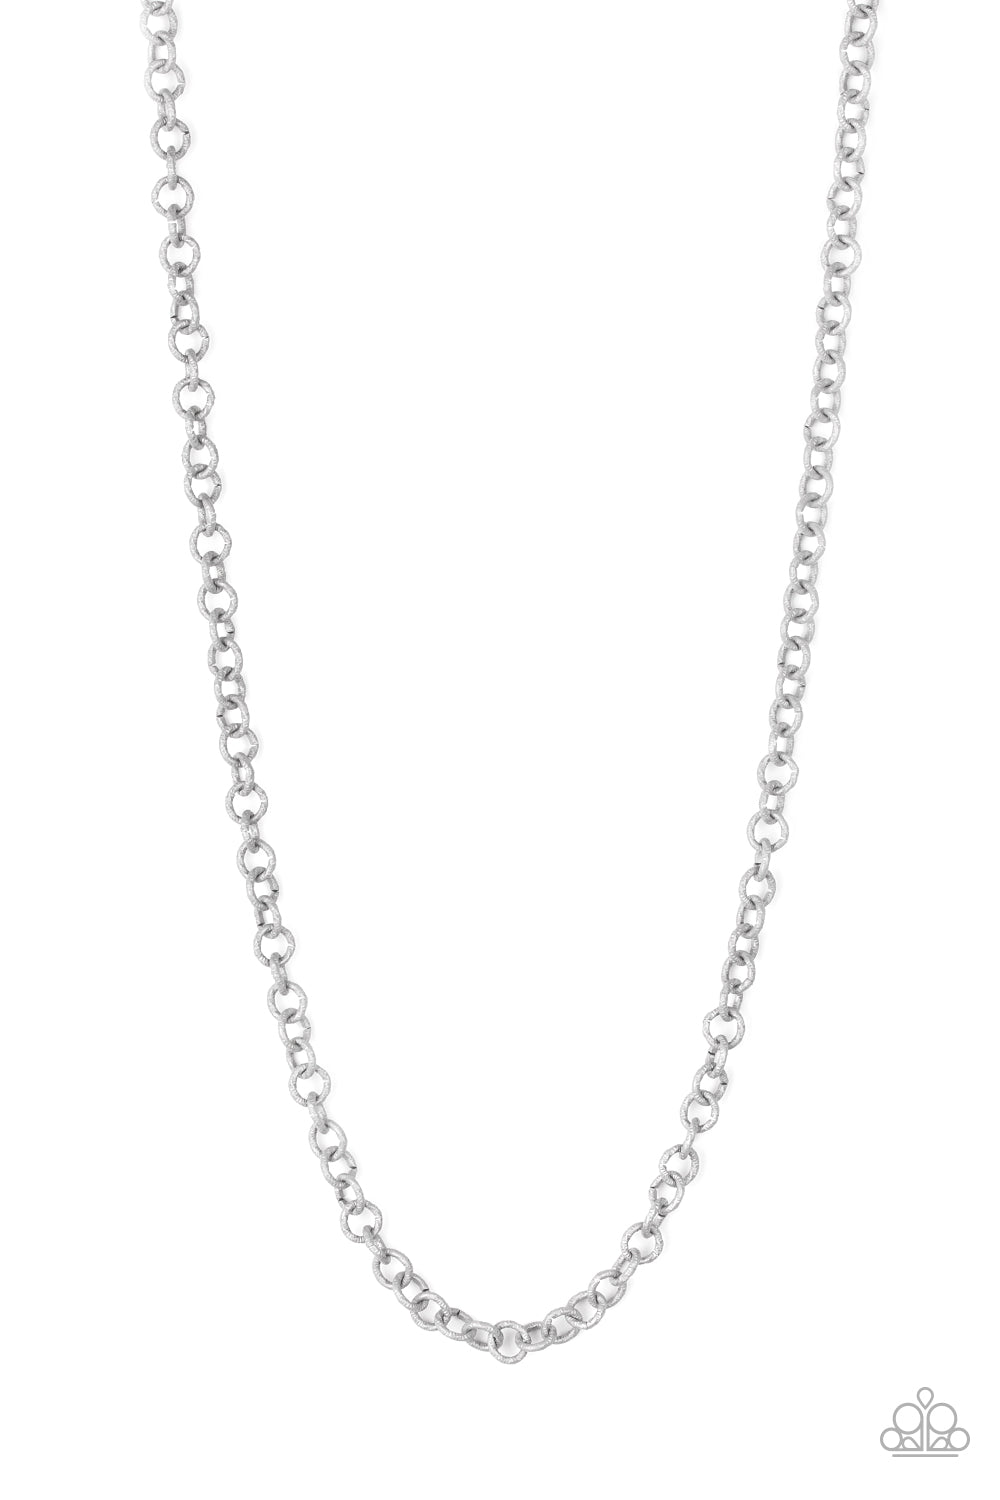 Paparazzi Accessories - Courtside Couture #N531 - Silver Urban Necklace